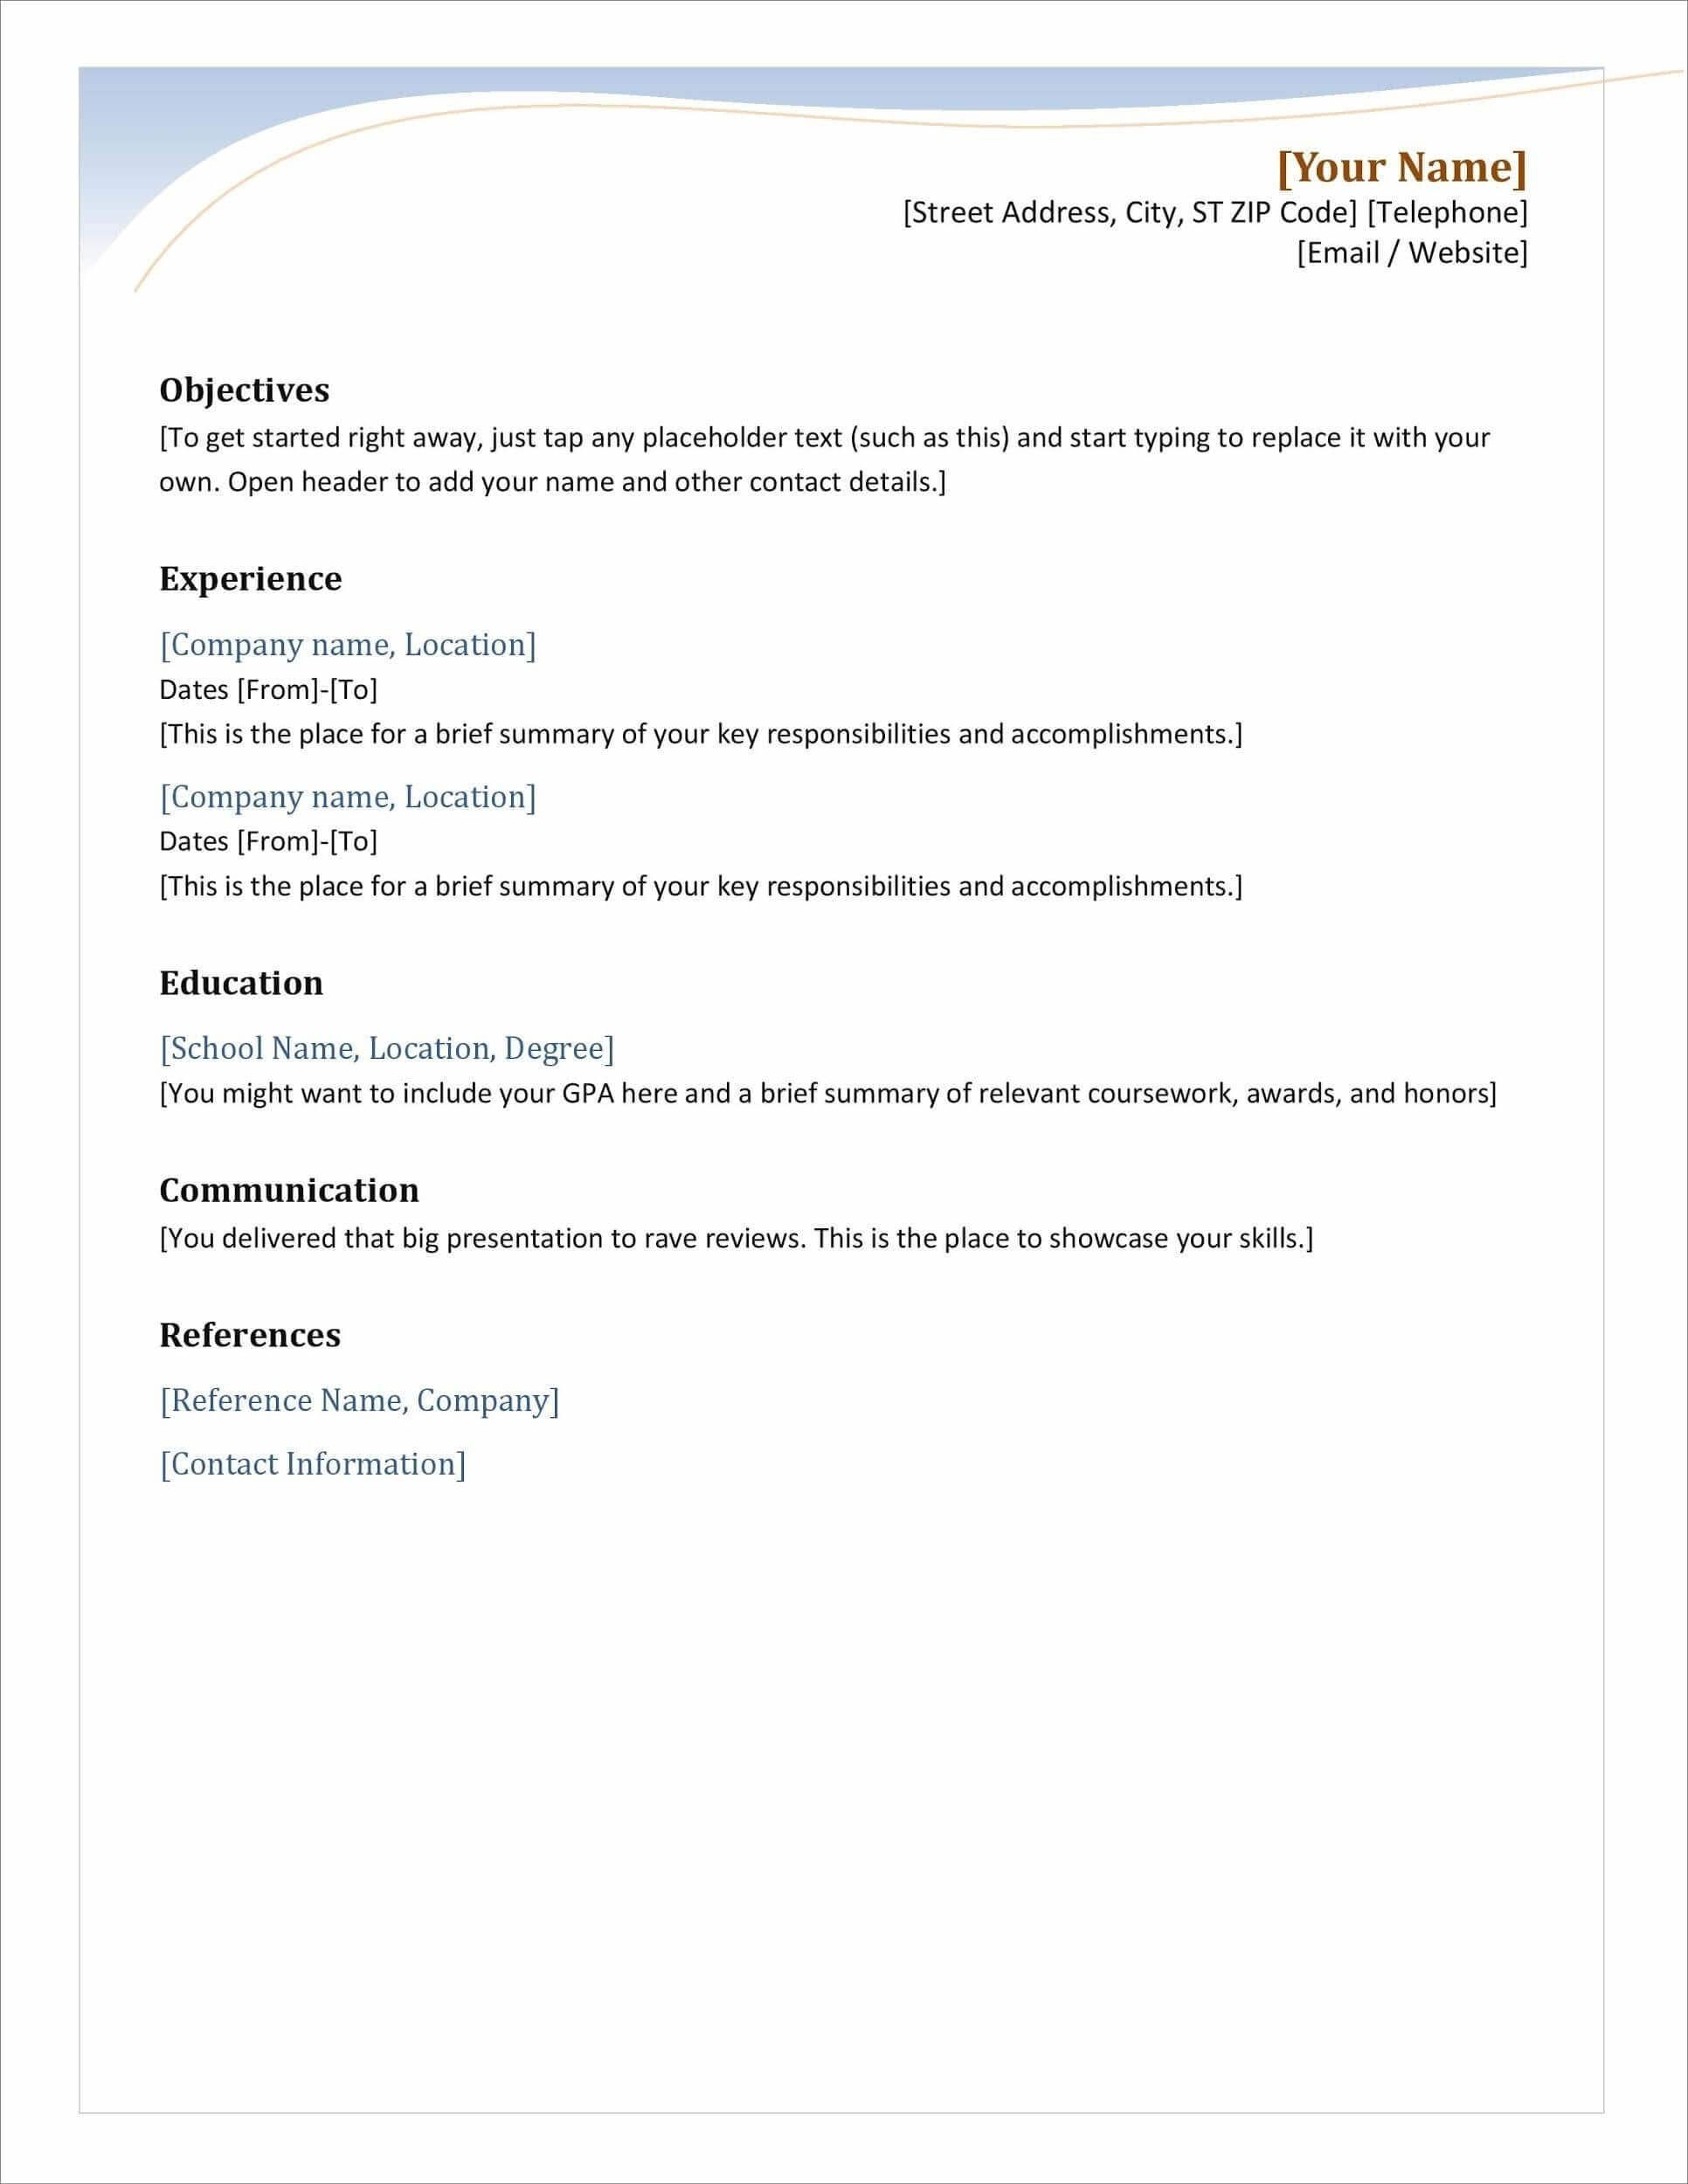 25 Resume Templates For Microsoft Word [Free Download] With Simple Resume Template Microsoft Word